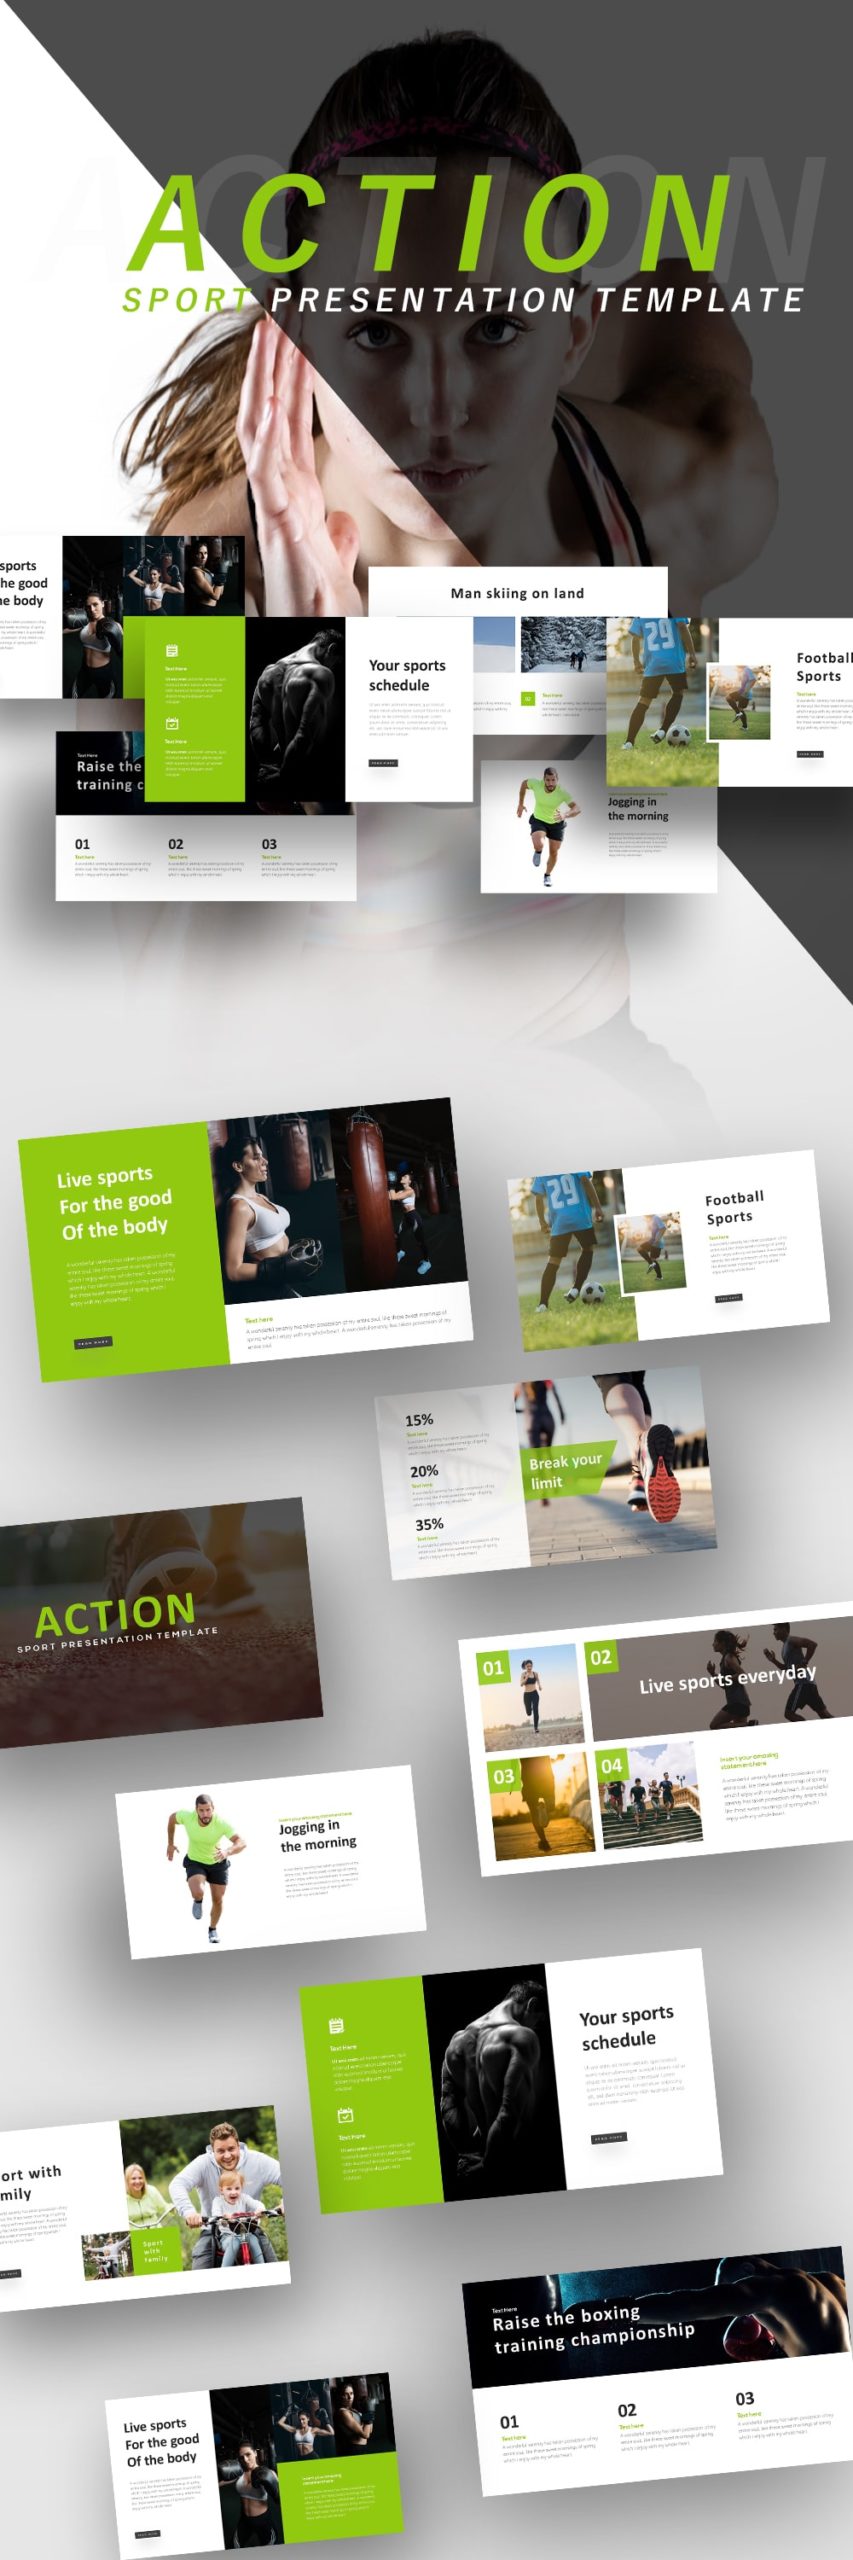 Free Action Sports PowerPoint